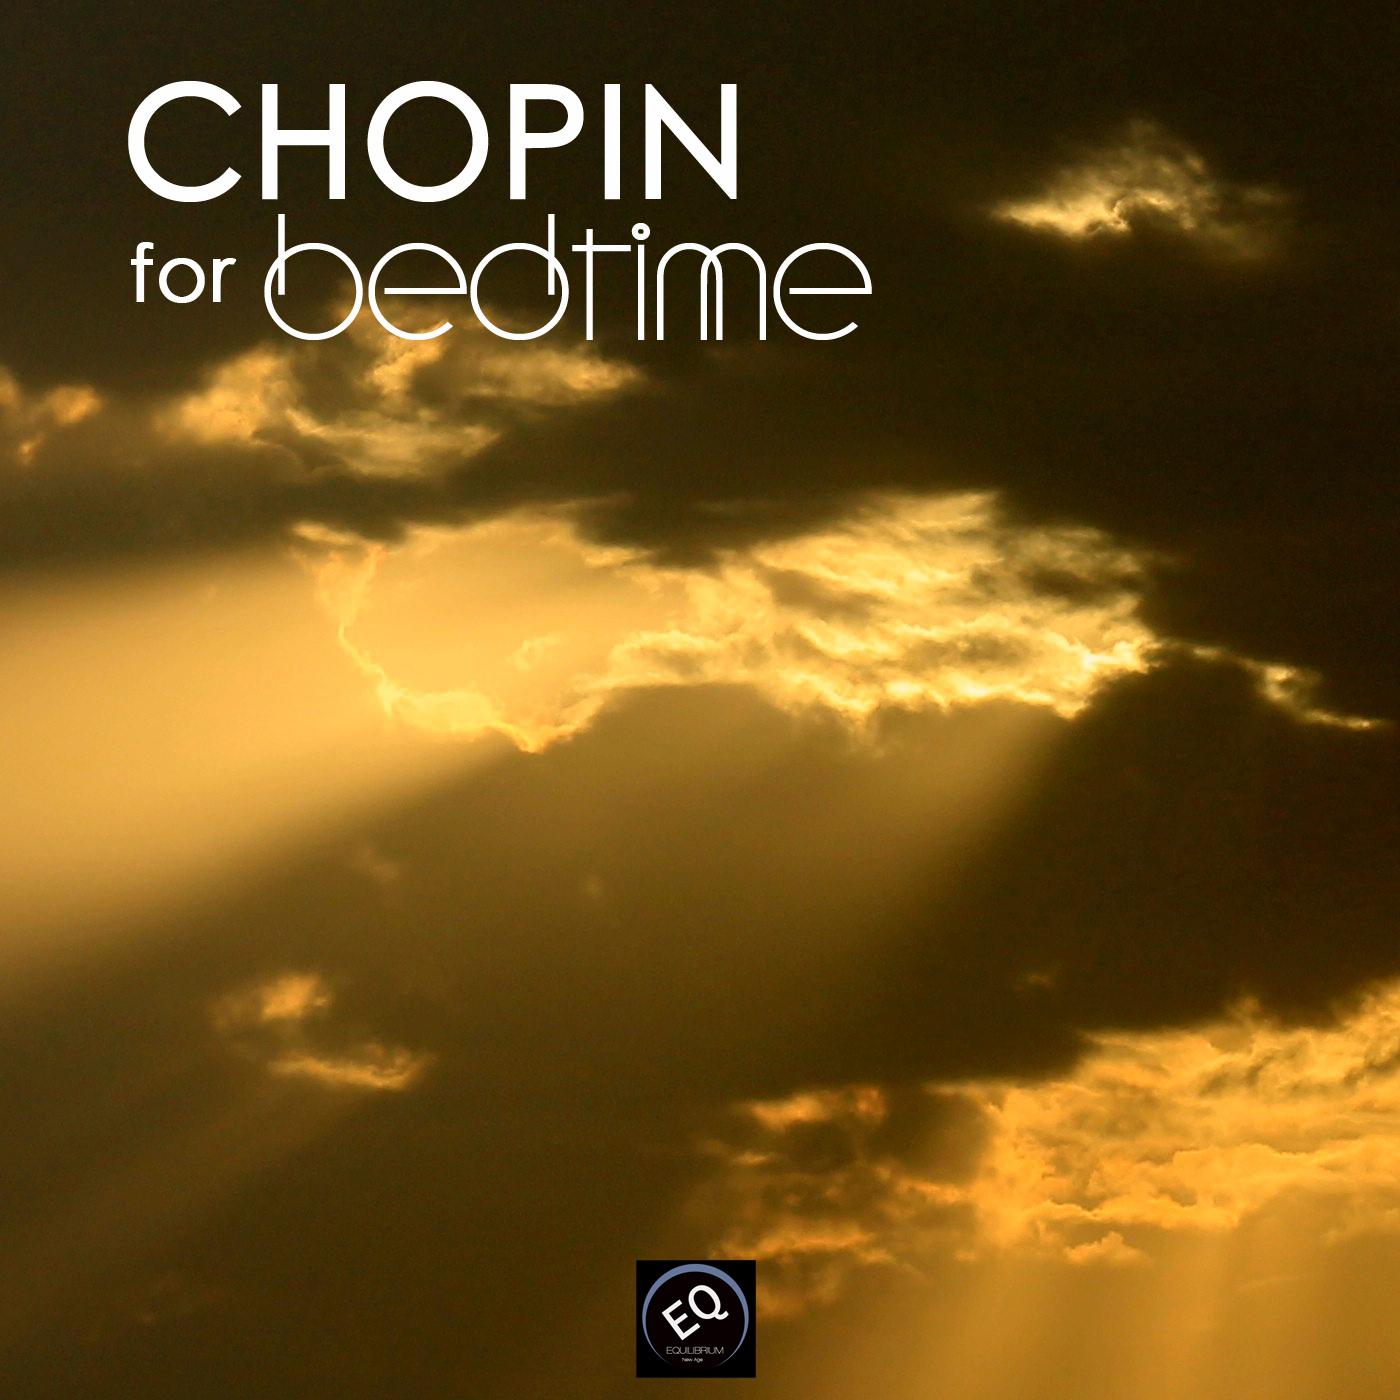 Chopin for Bedtime - Toddler Songs and Bedtime Songs to Help Your Baby Sleep Through the Night. Classical Baby Lullaby Songs